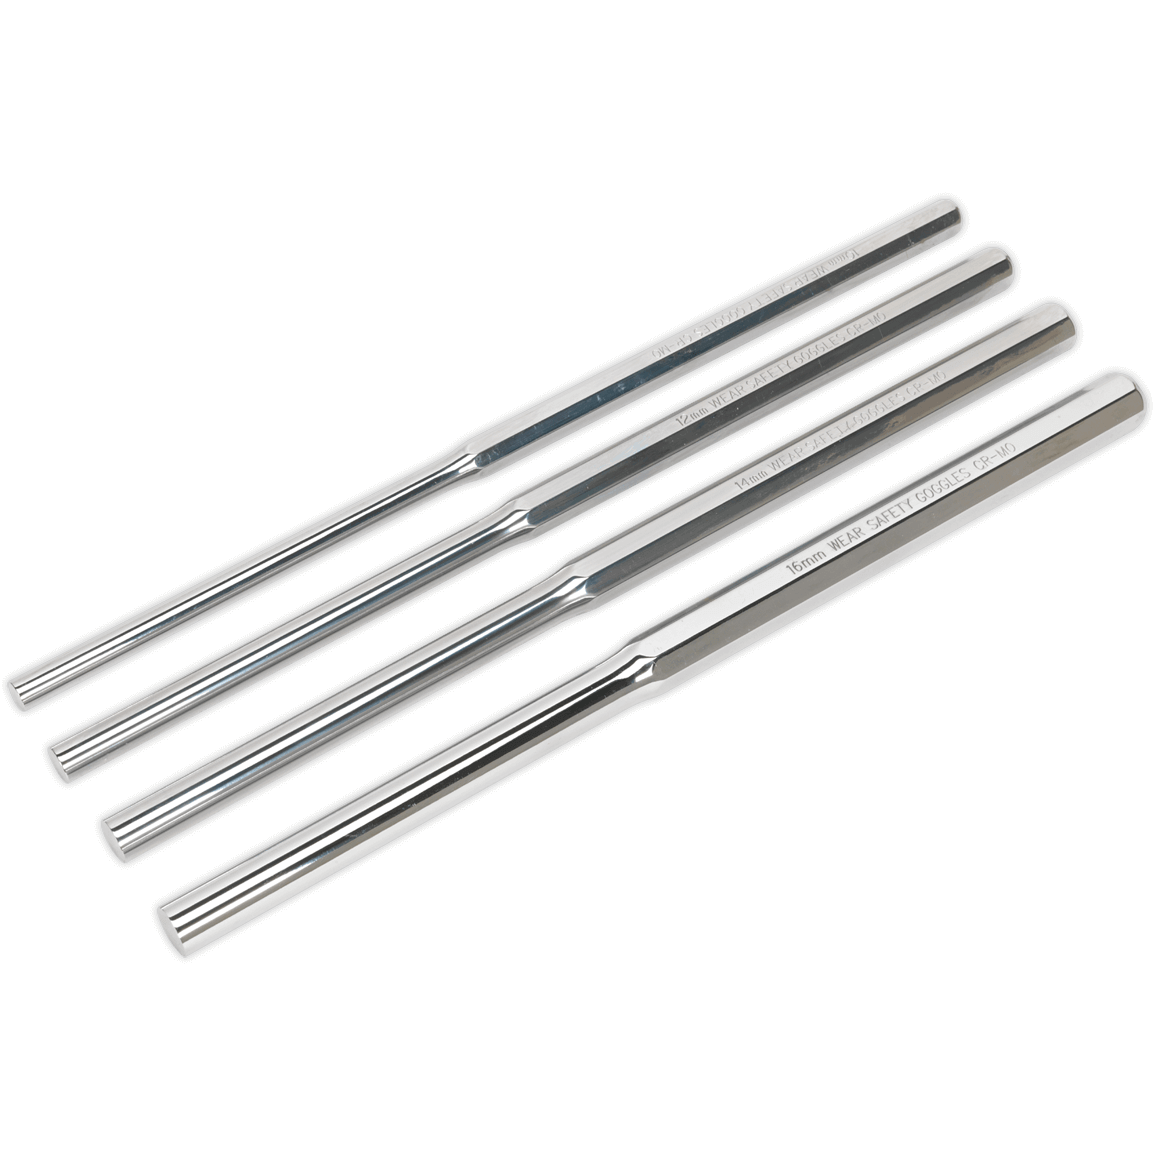 Sealey 4 Piece Extra Long Parallel Pin Punch Set